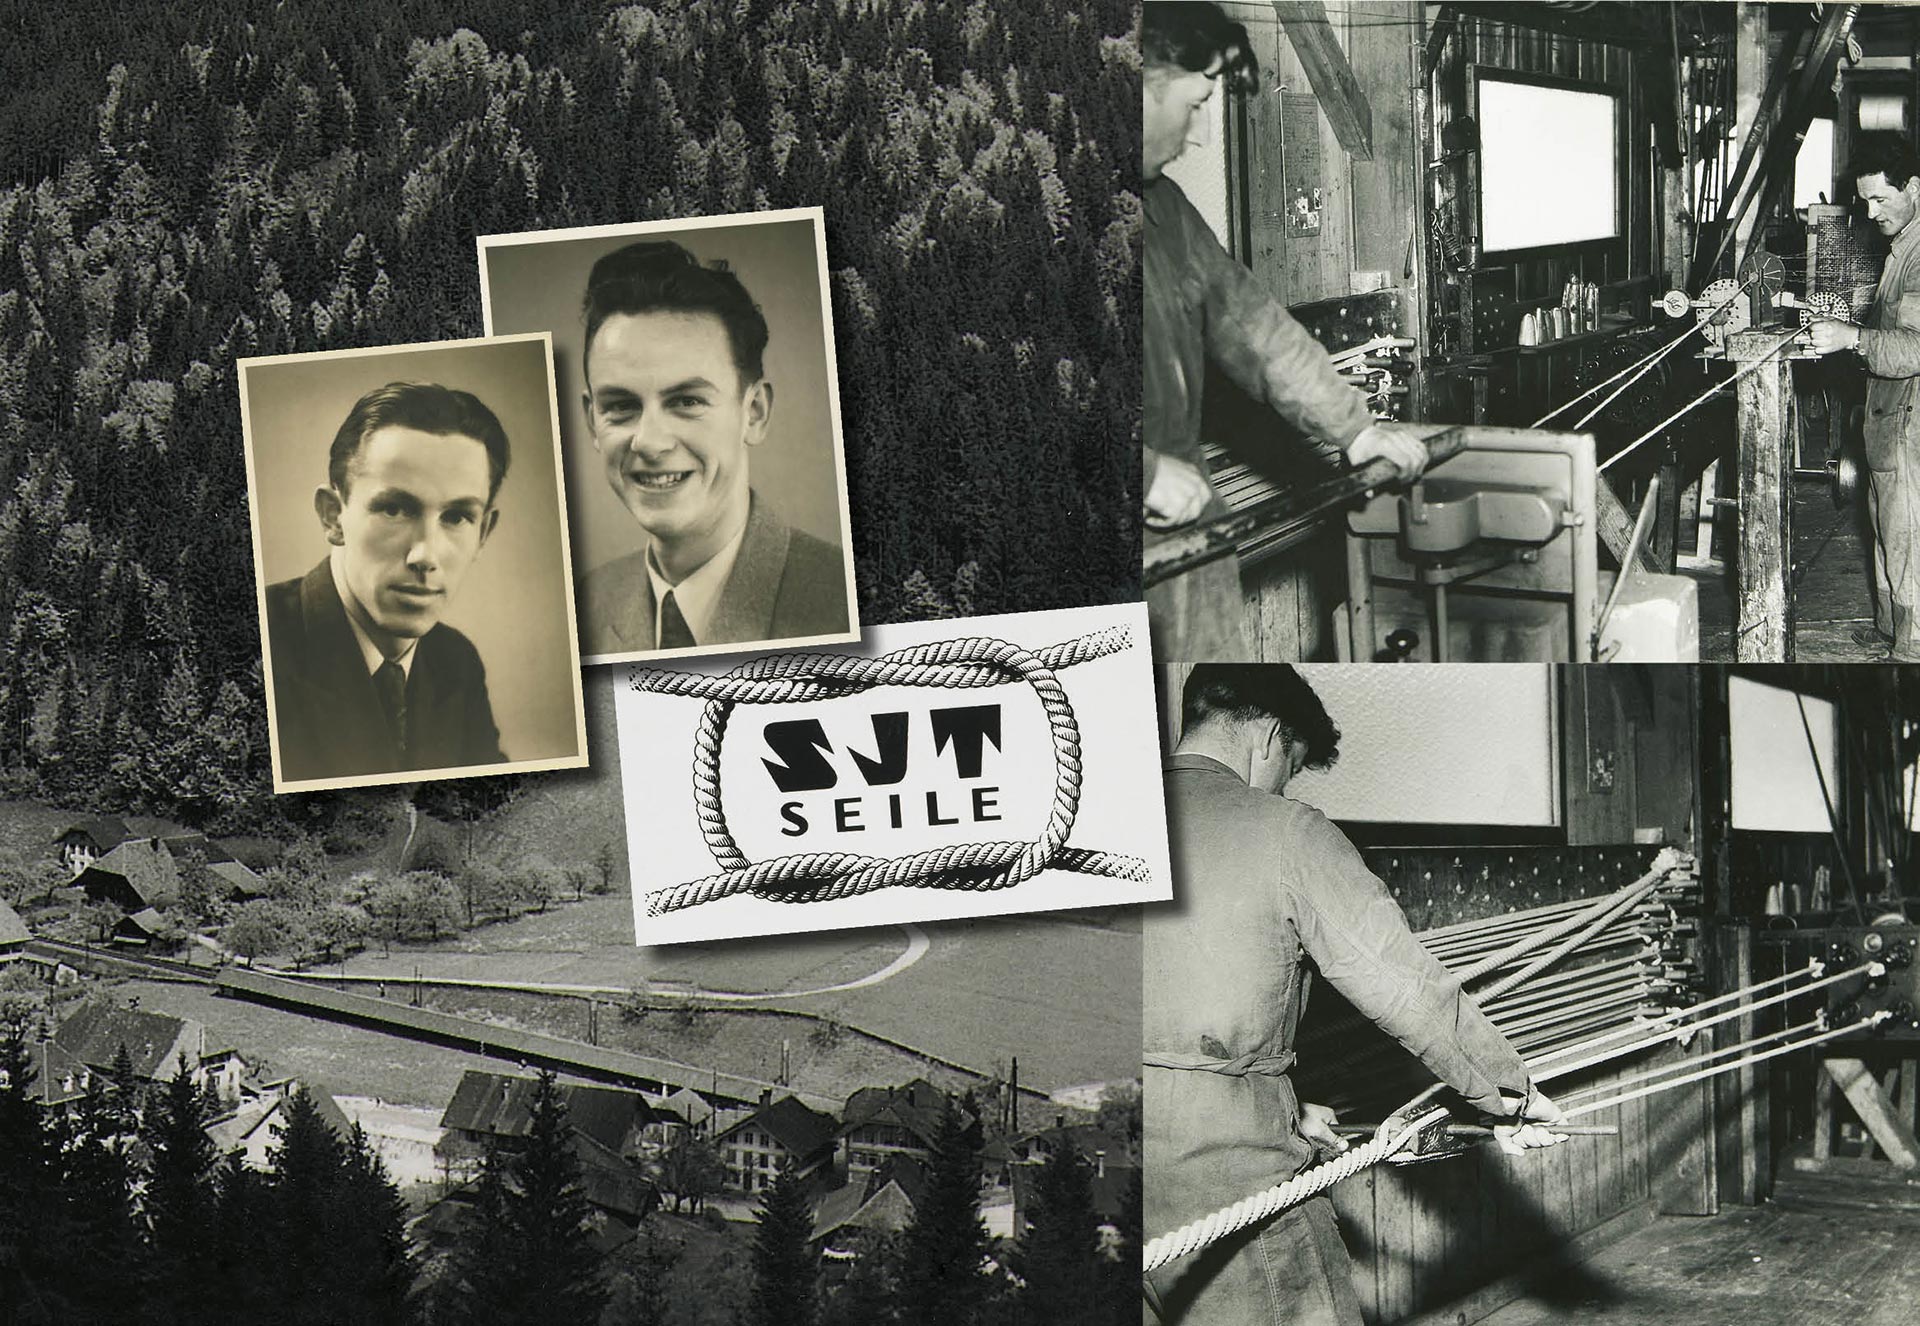 Montage of images of fibre rope making in the 1950s and images of Hans junior and Eduard Jakob